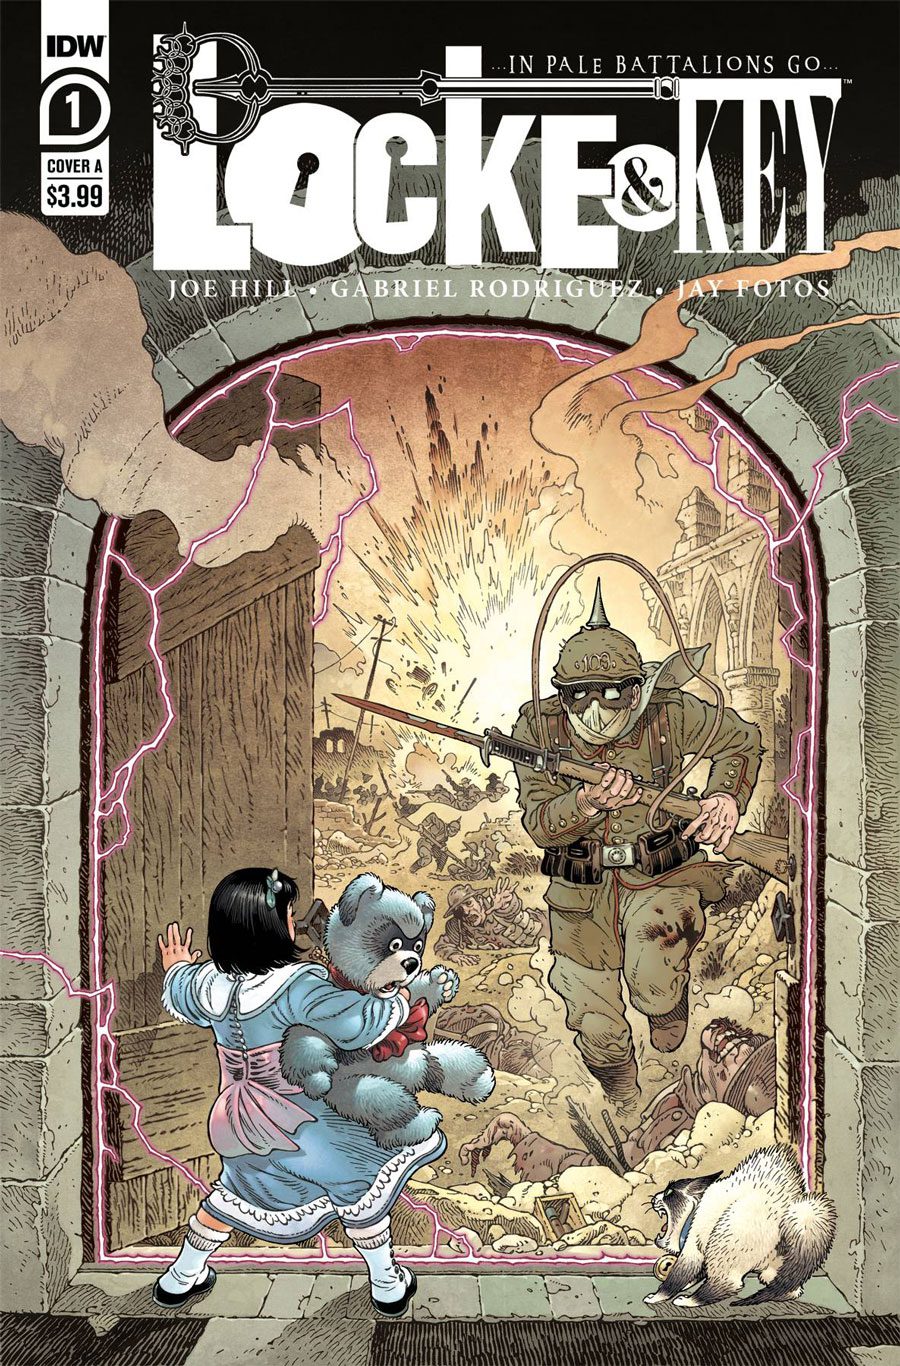 LOCKE & KEY IN PALE BATTALIONS GO #1 (A RODRIGUEZ COVER)